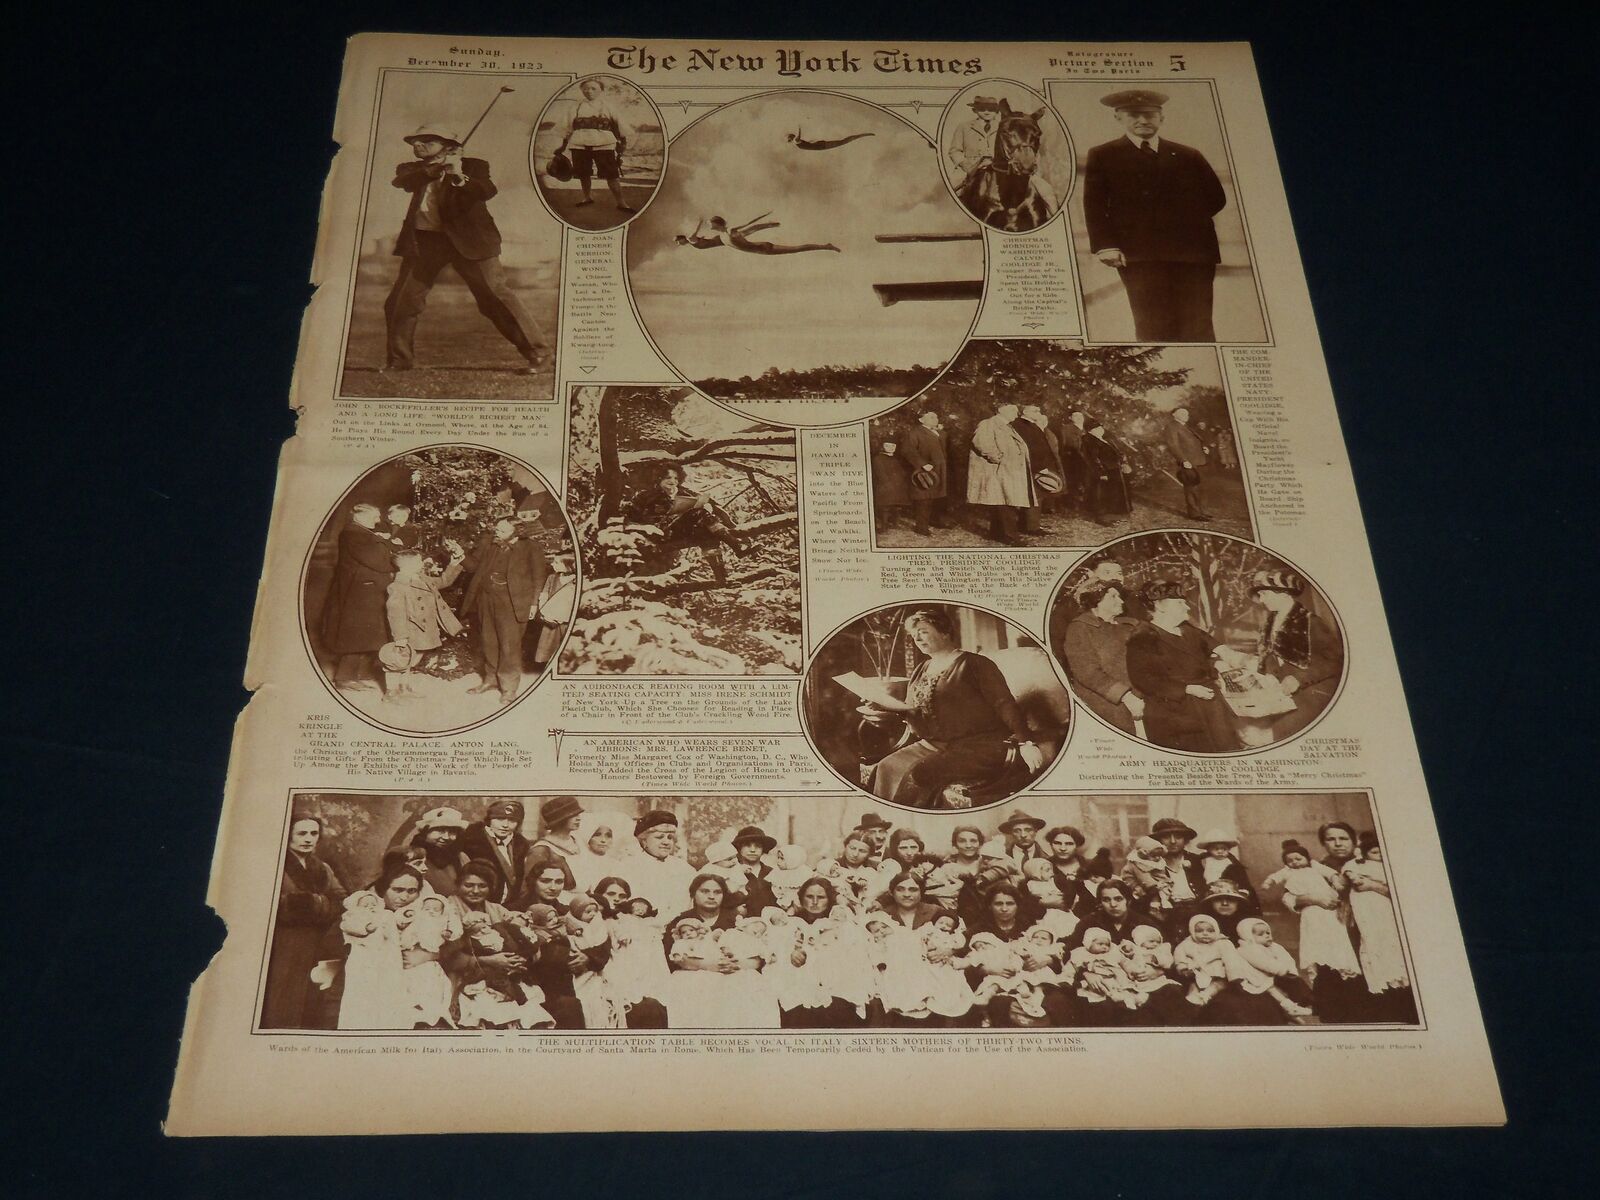 1923 DECEMBER NEW YORK TIMES PICTURE SECTION - ENGLISH BEAUTIES - NT 8889